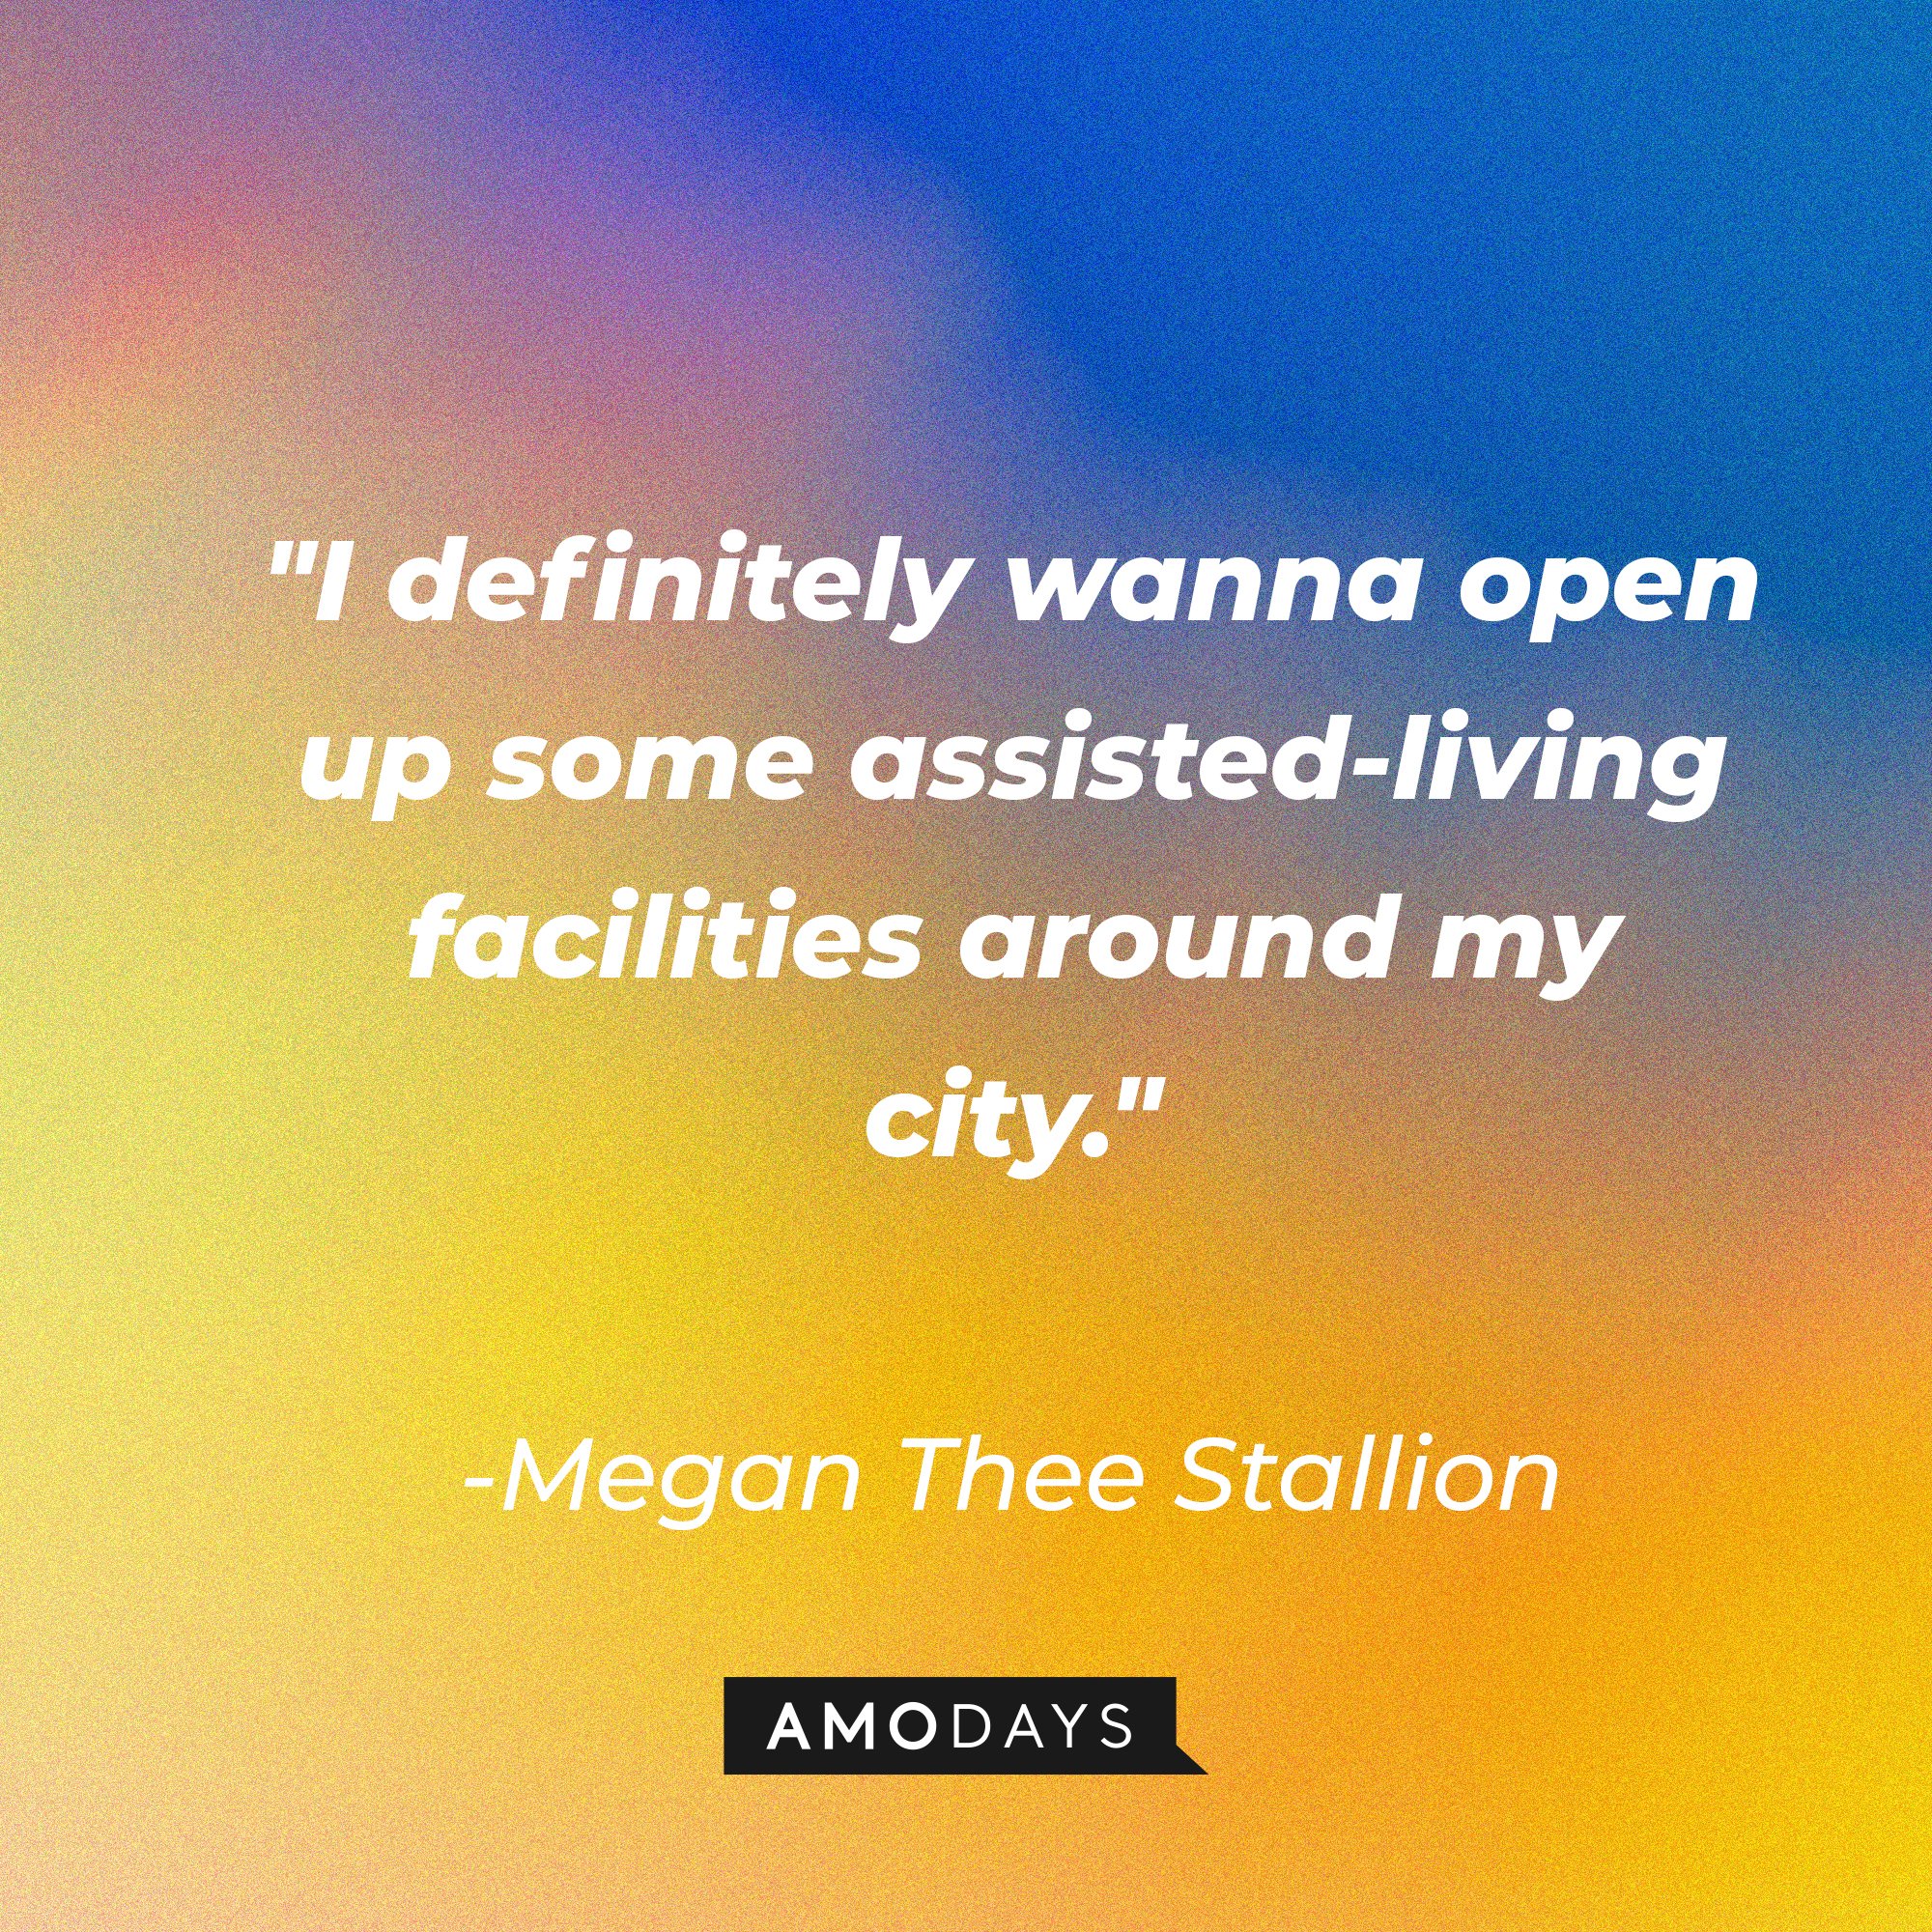 Megan Thee Stallion’s quote: “I definitely wanna open up some assisted-living facilities around my city." | Image: AmoDays 